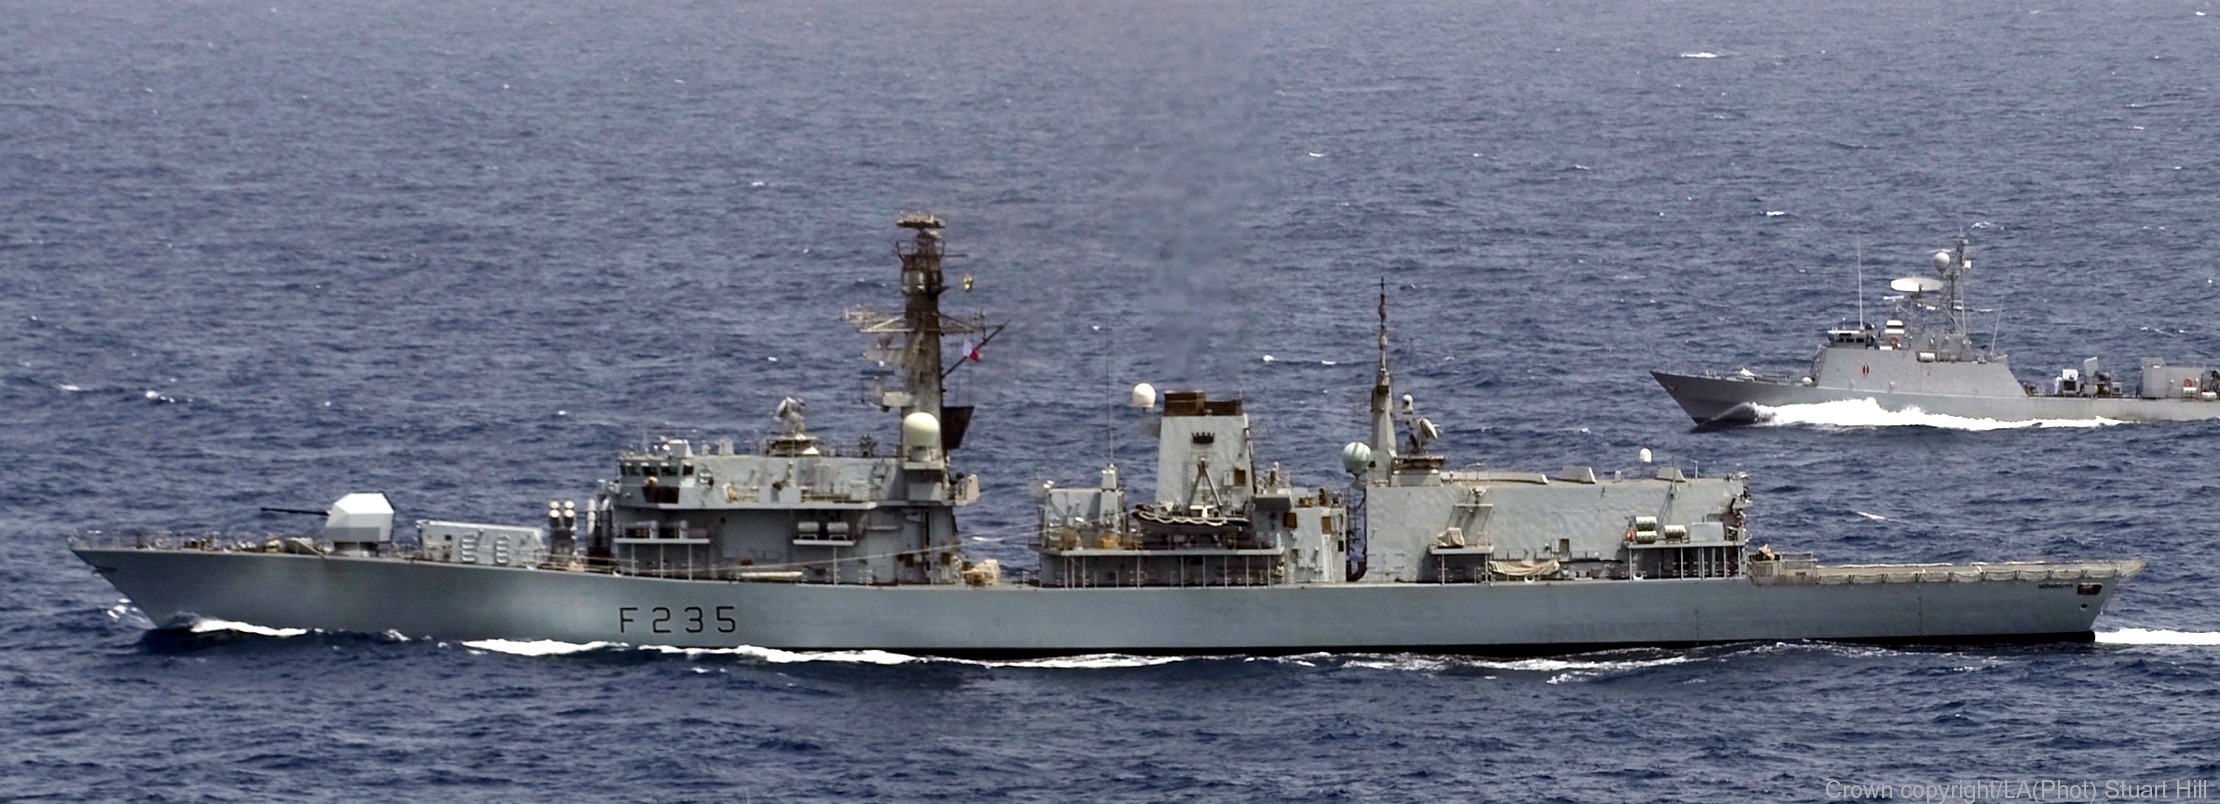 f-235 hms monmouth type 23 duke class guided missile frigate ffg royal navy 04